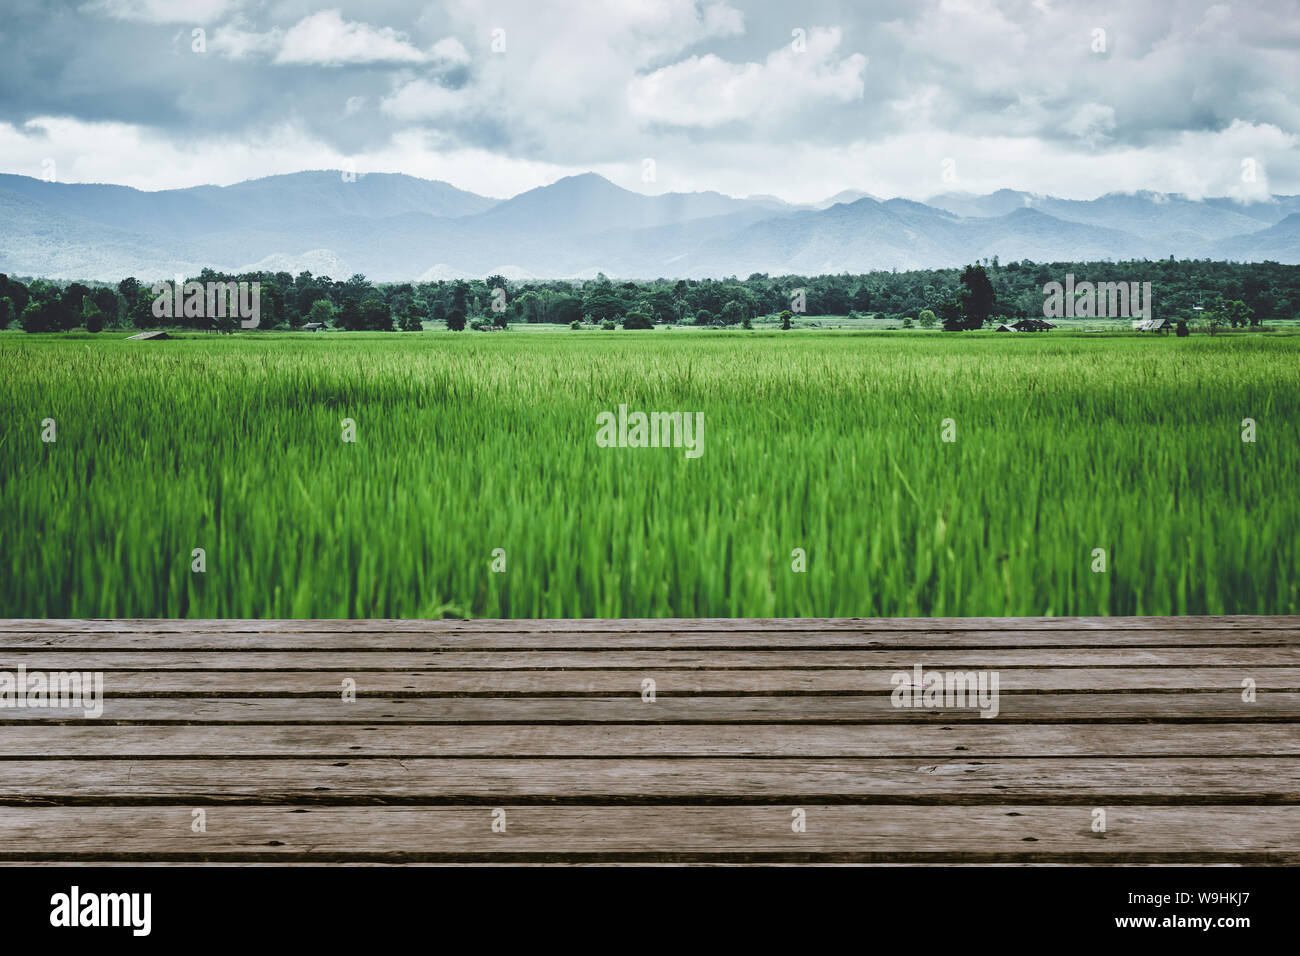 green field with wooden table top foreground blank space for advertising.rice field outdoor rural view. Stock Photo